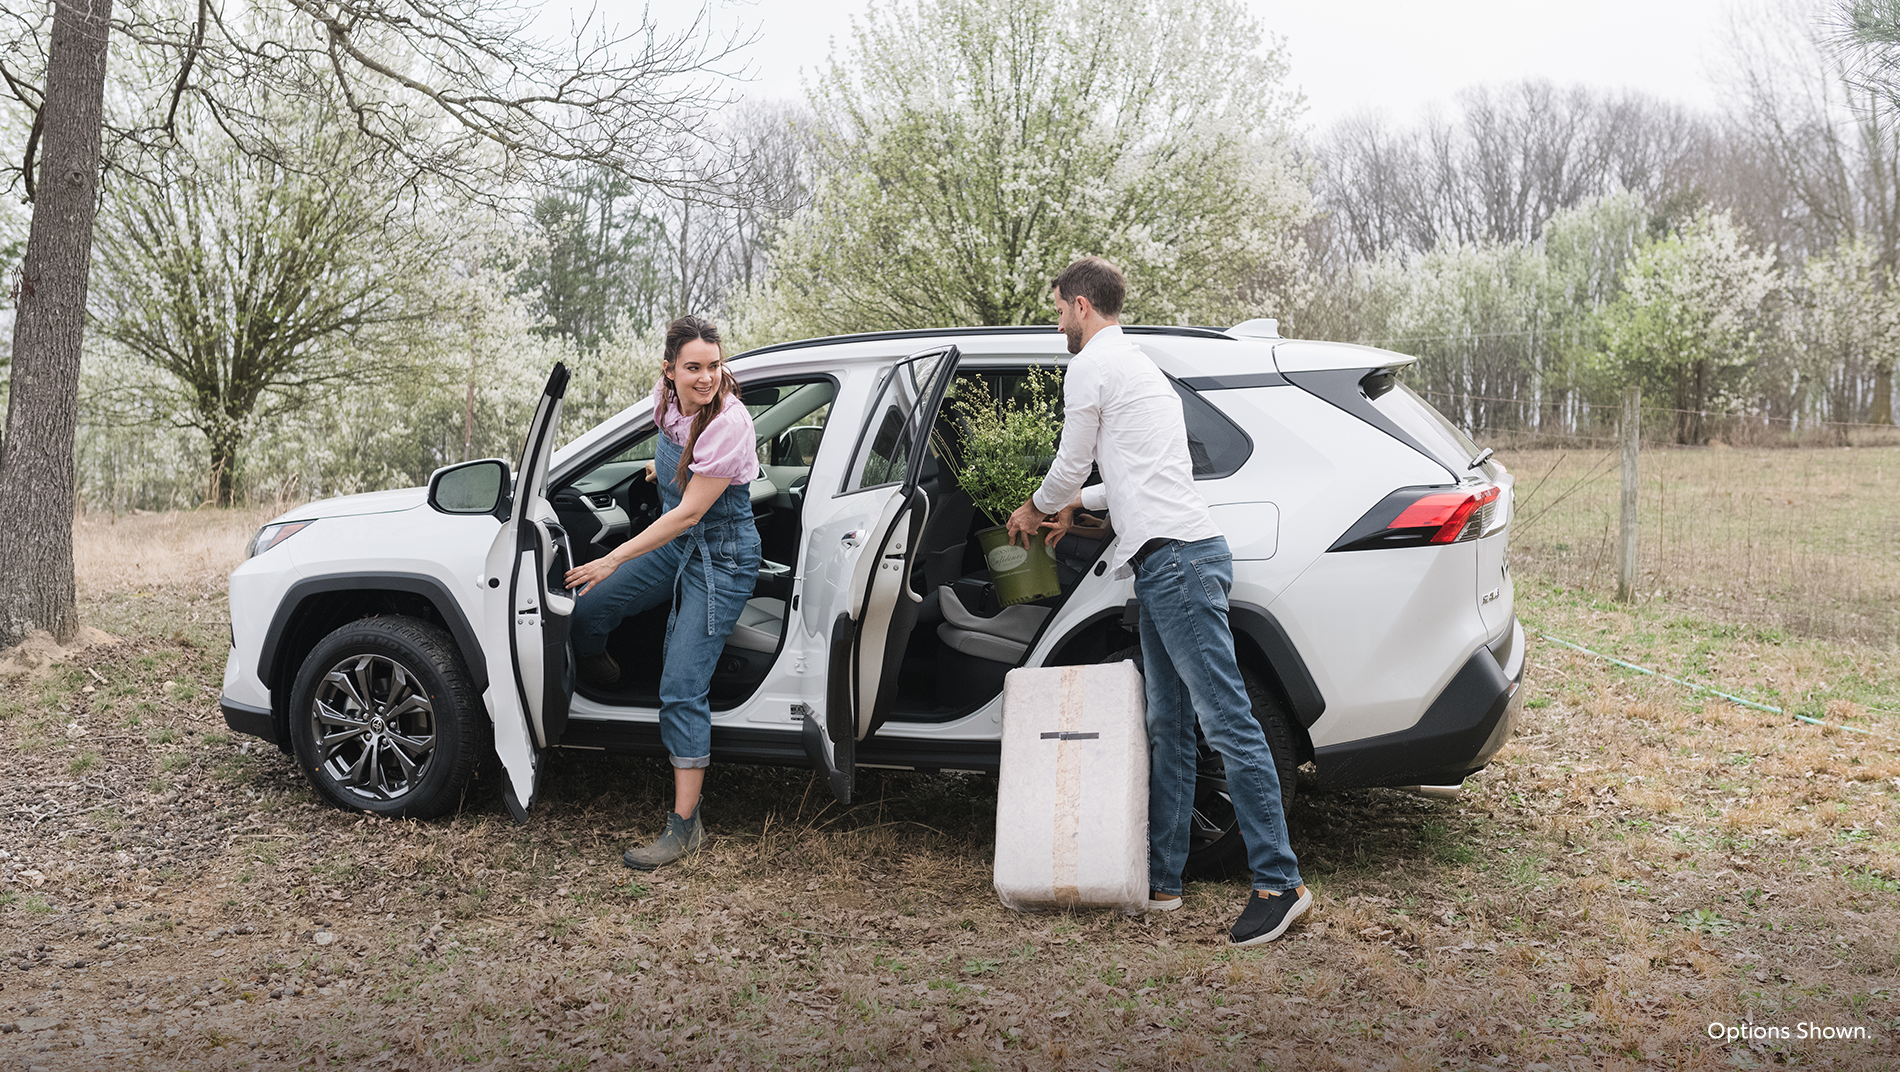 a White RAV4 Hybrid beyond zero vehicle parked in a field with a man and woman getting plants out of the backseat